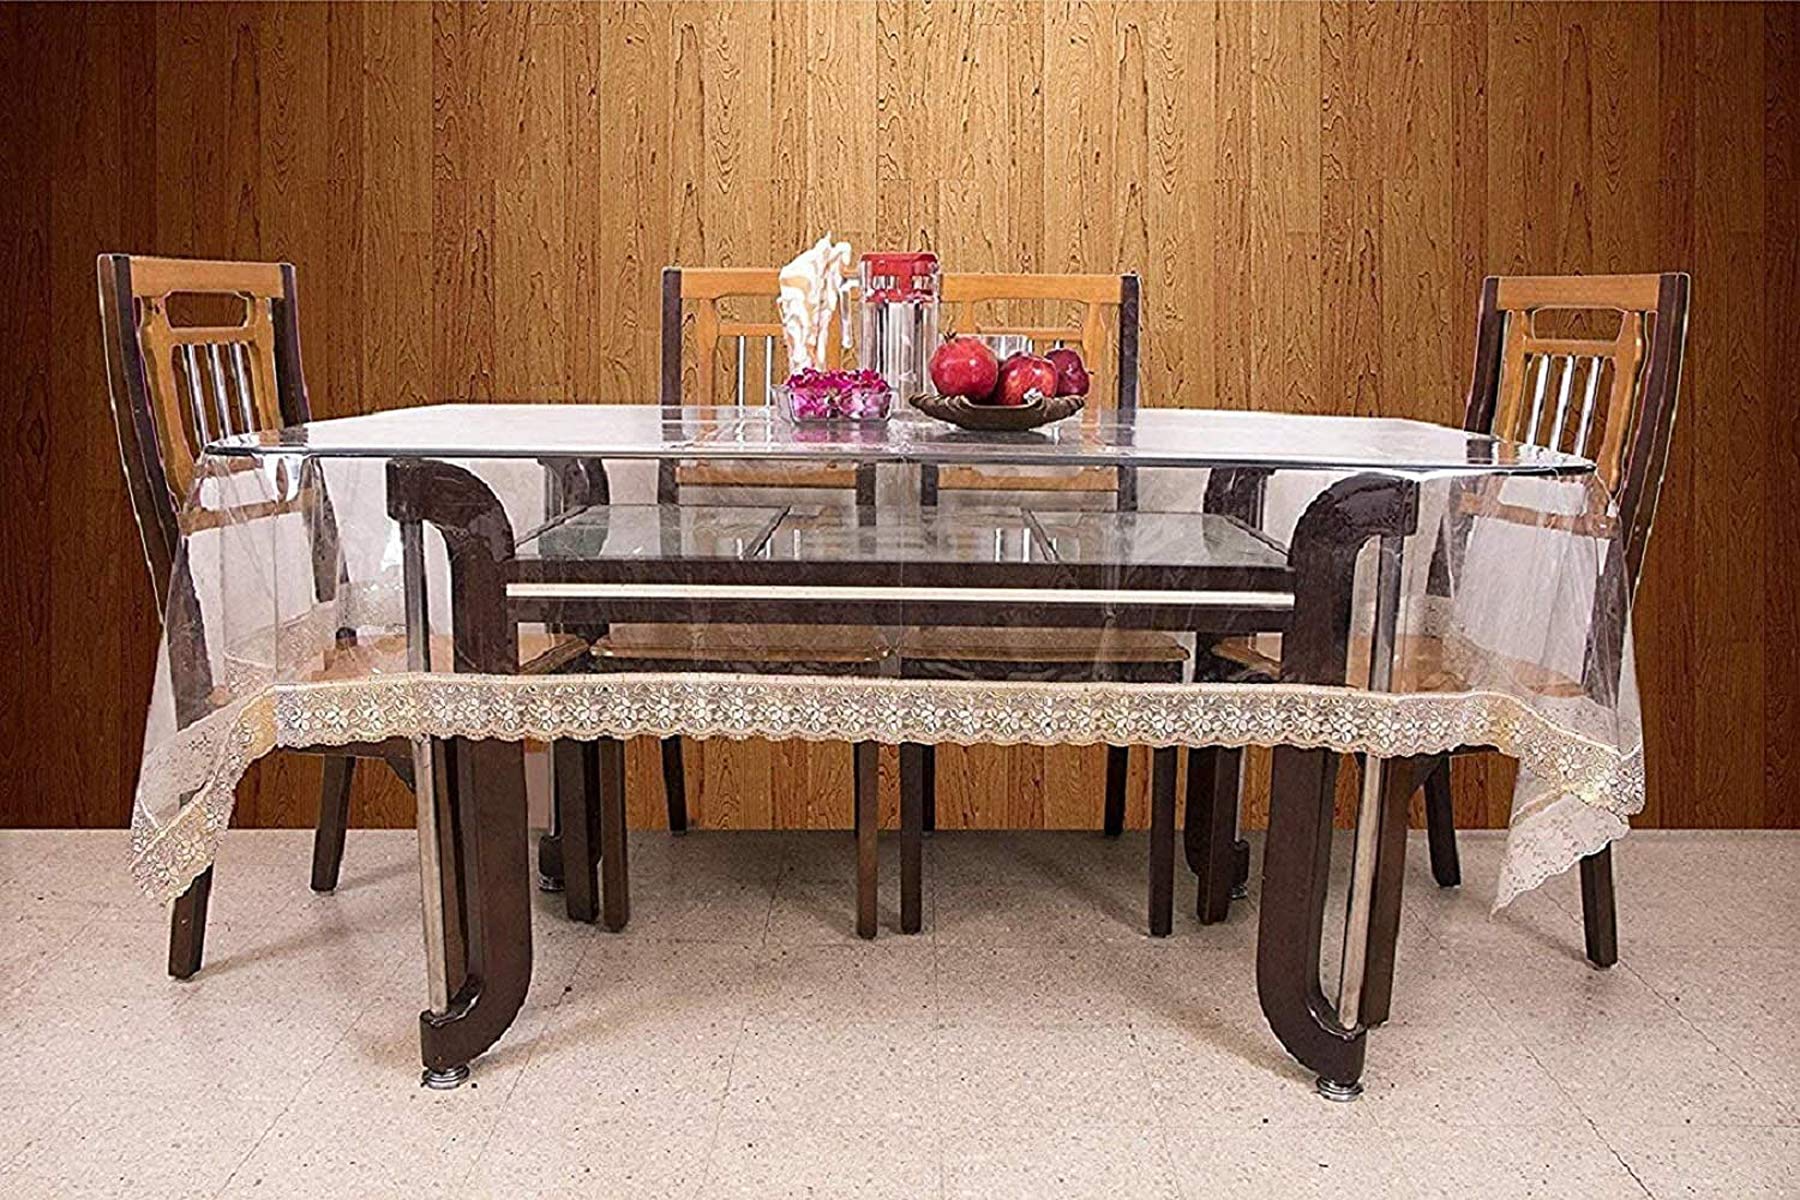 Kuber Industries Dining Table Cover 6 Seater|Table Cloth|Table Cover for Home, Restaurant|(Transparent Golden)